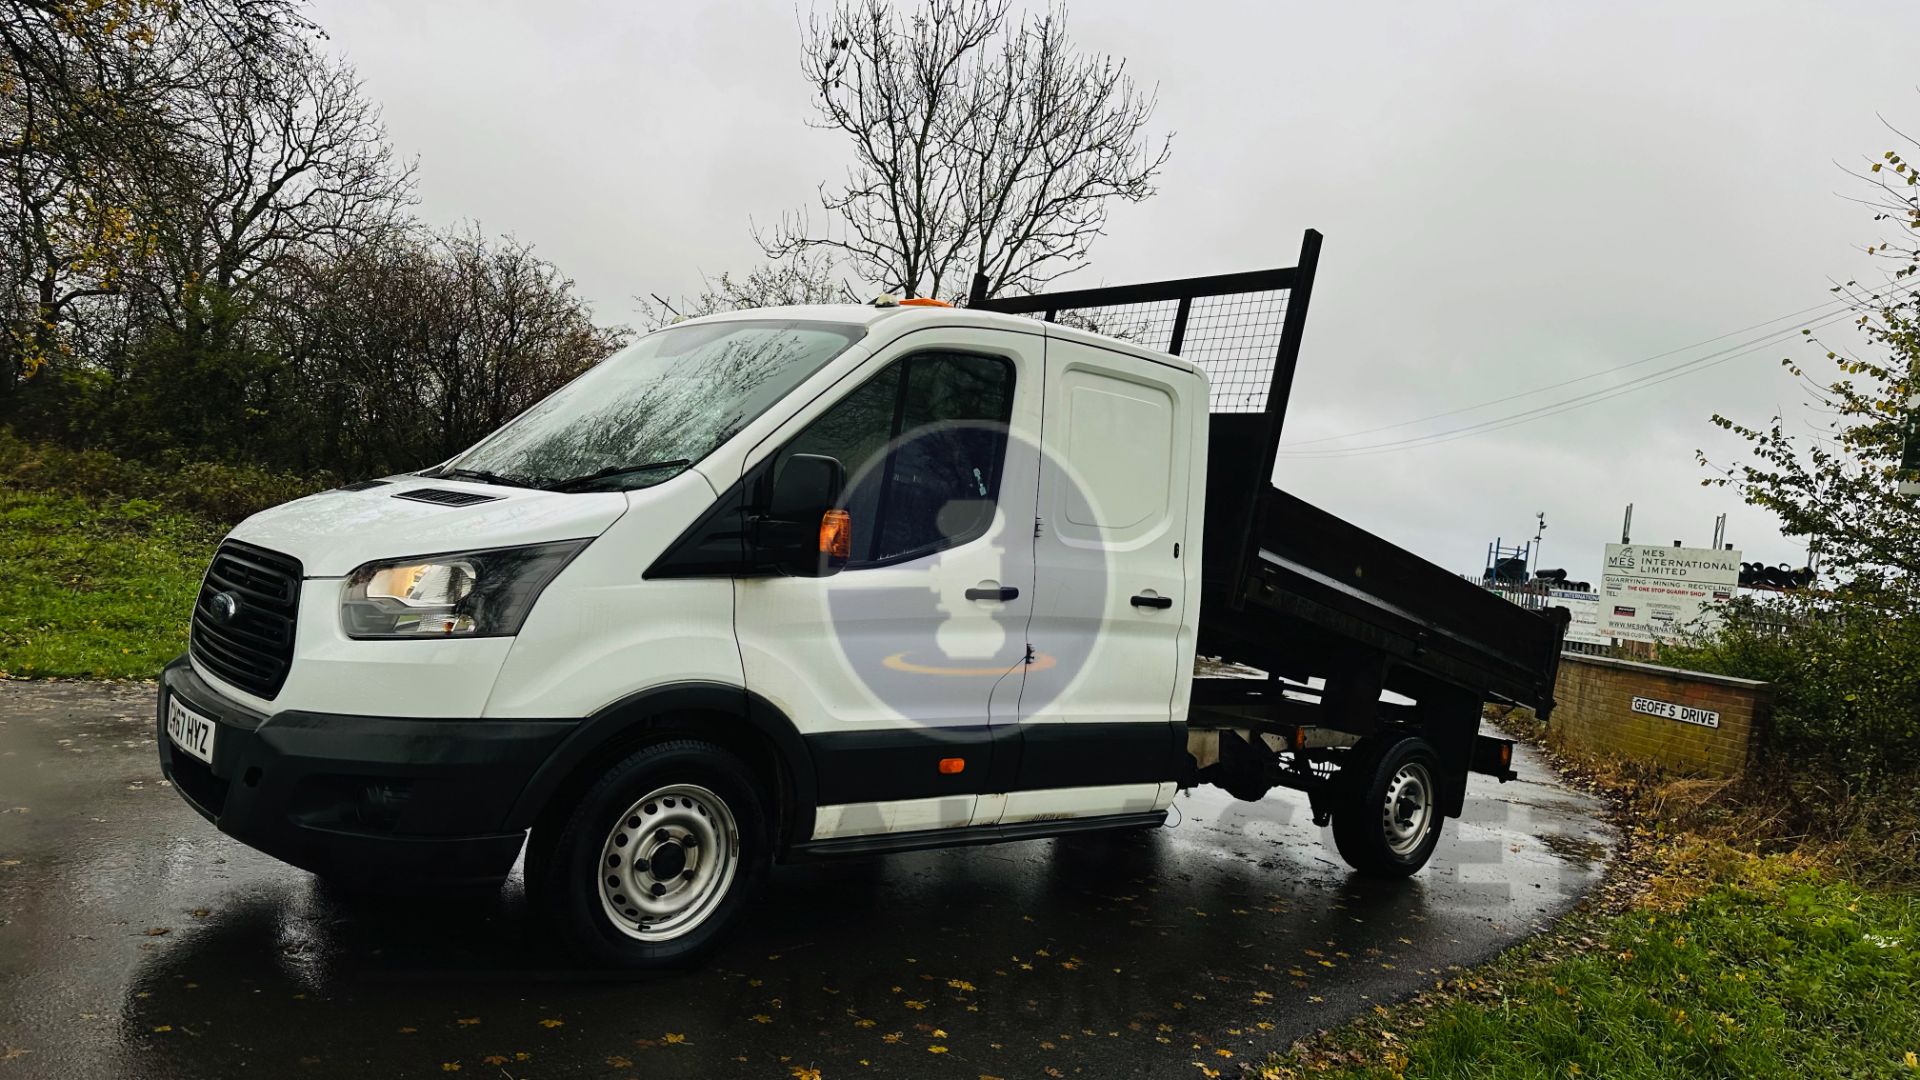 (ON SALE) FORD TRANSIT 130 T350 *LWB - UTILITY CAB TIPPER TRUCK* (2018 - EURO 6) 2.0 TDCI (3500 KG) - Image 7 of 34